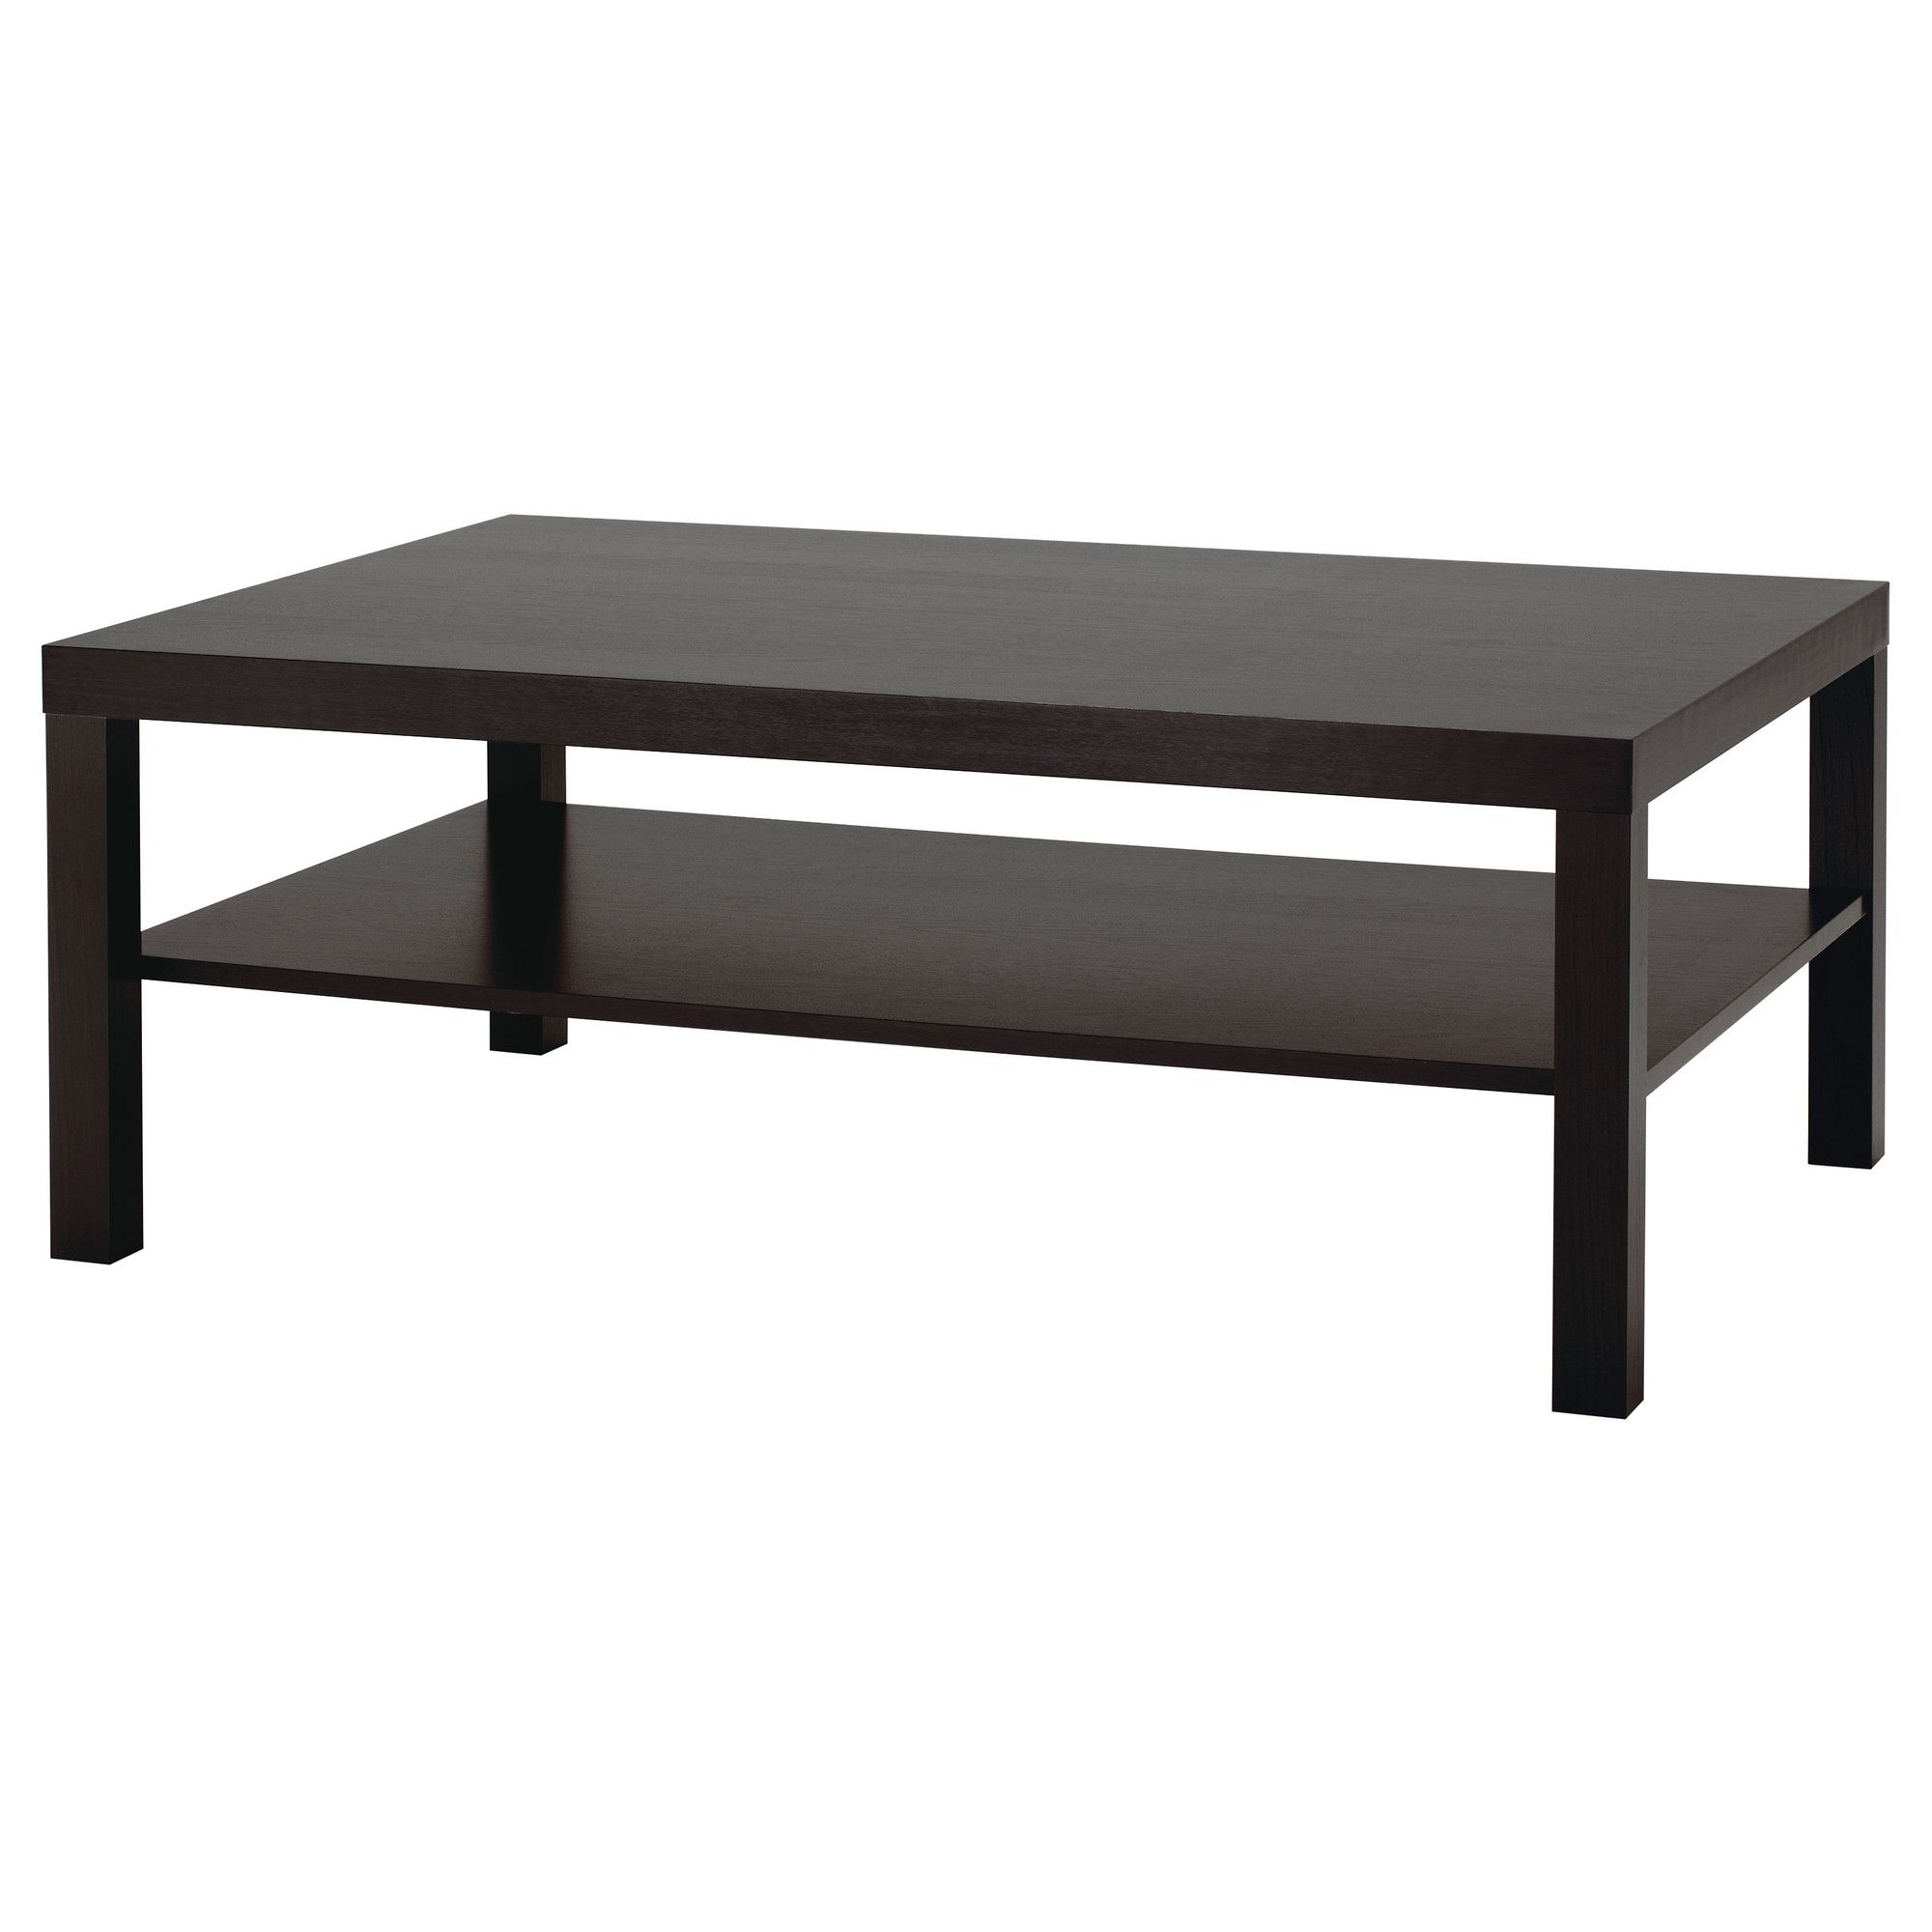 Coffee Tables Ikea Usa Use The Largest As A Coffee Table Or Group Them For A Graphic Display (View 8 of 9)